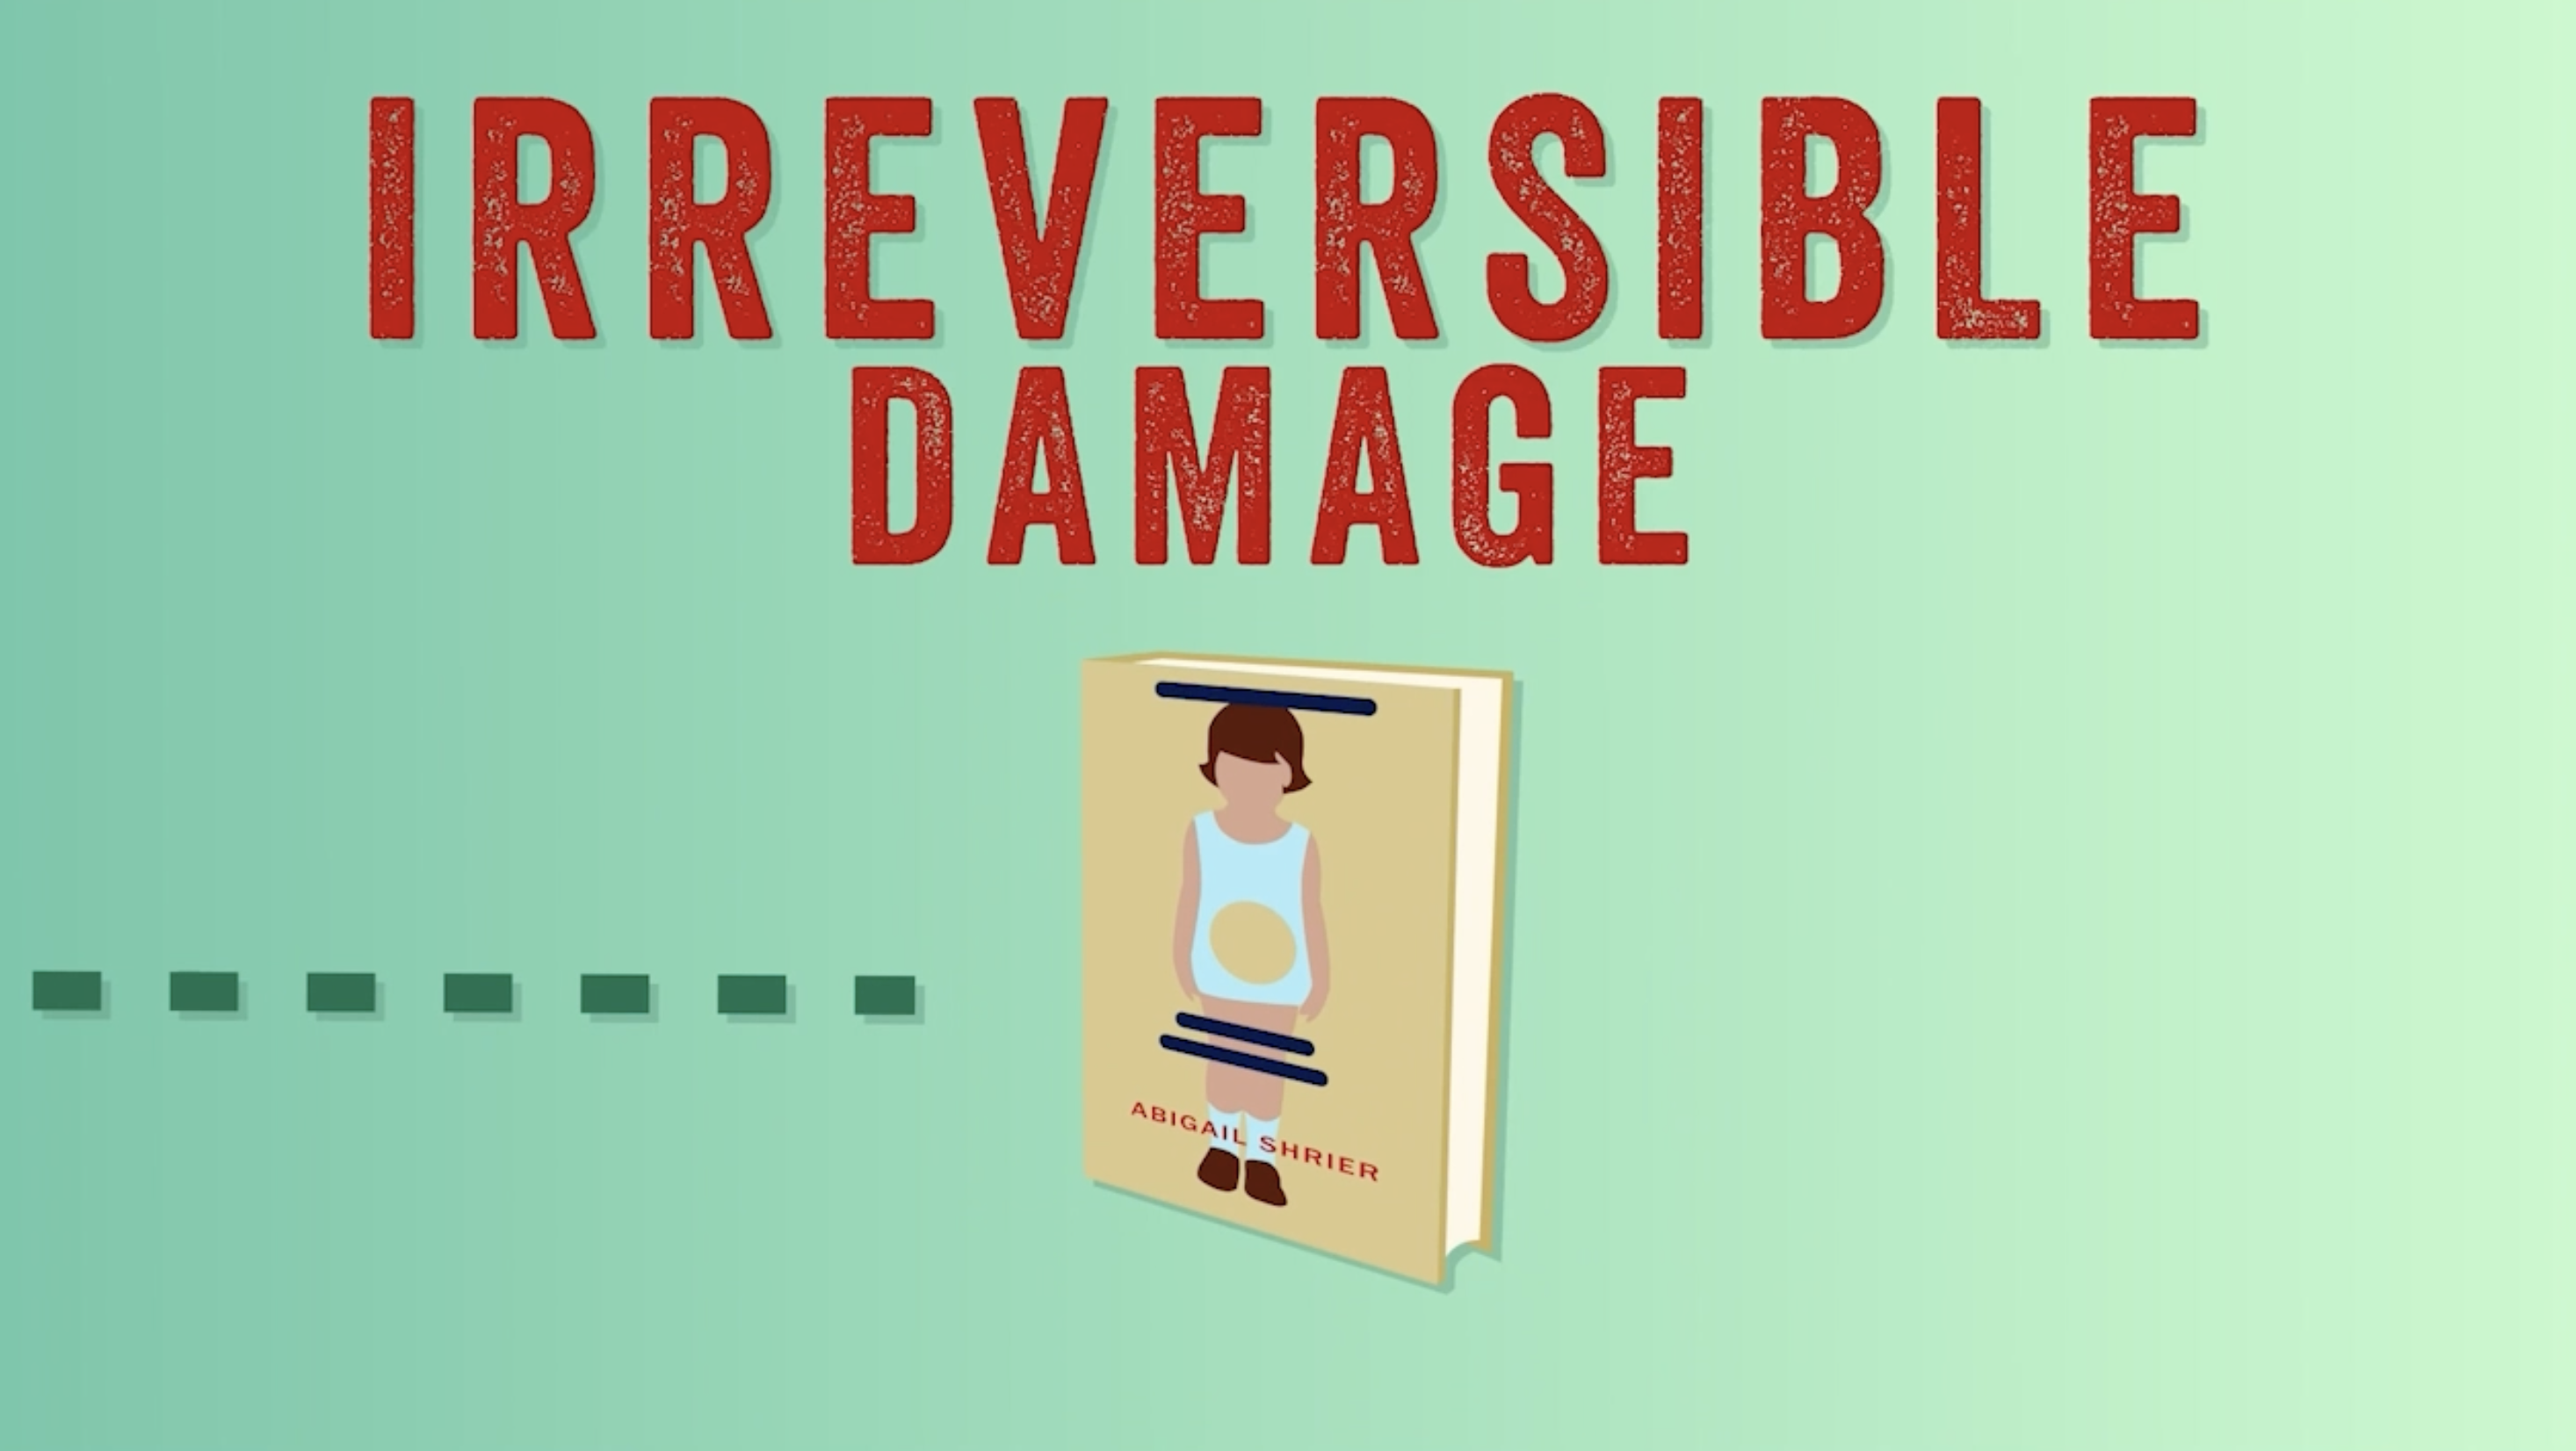 Anti-trans book "Irreversible Damage," in large red all caps font, a depiction of Abigail Shrier's book cover, on a mint green background